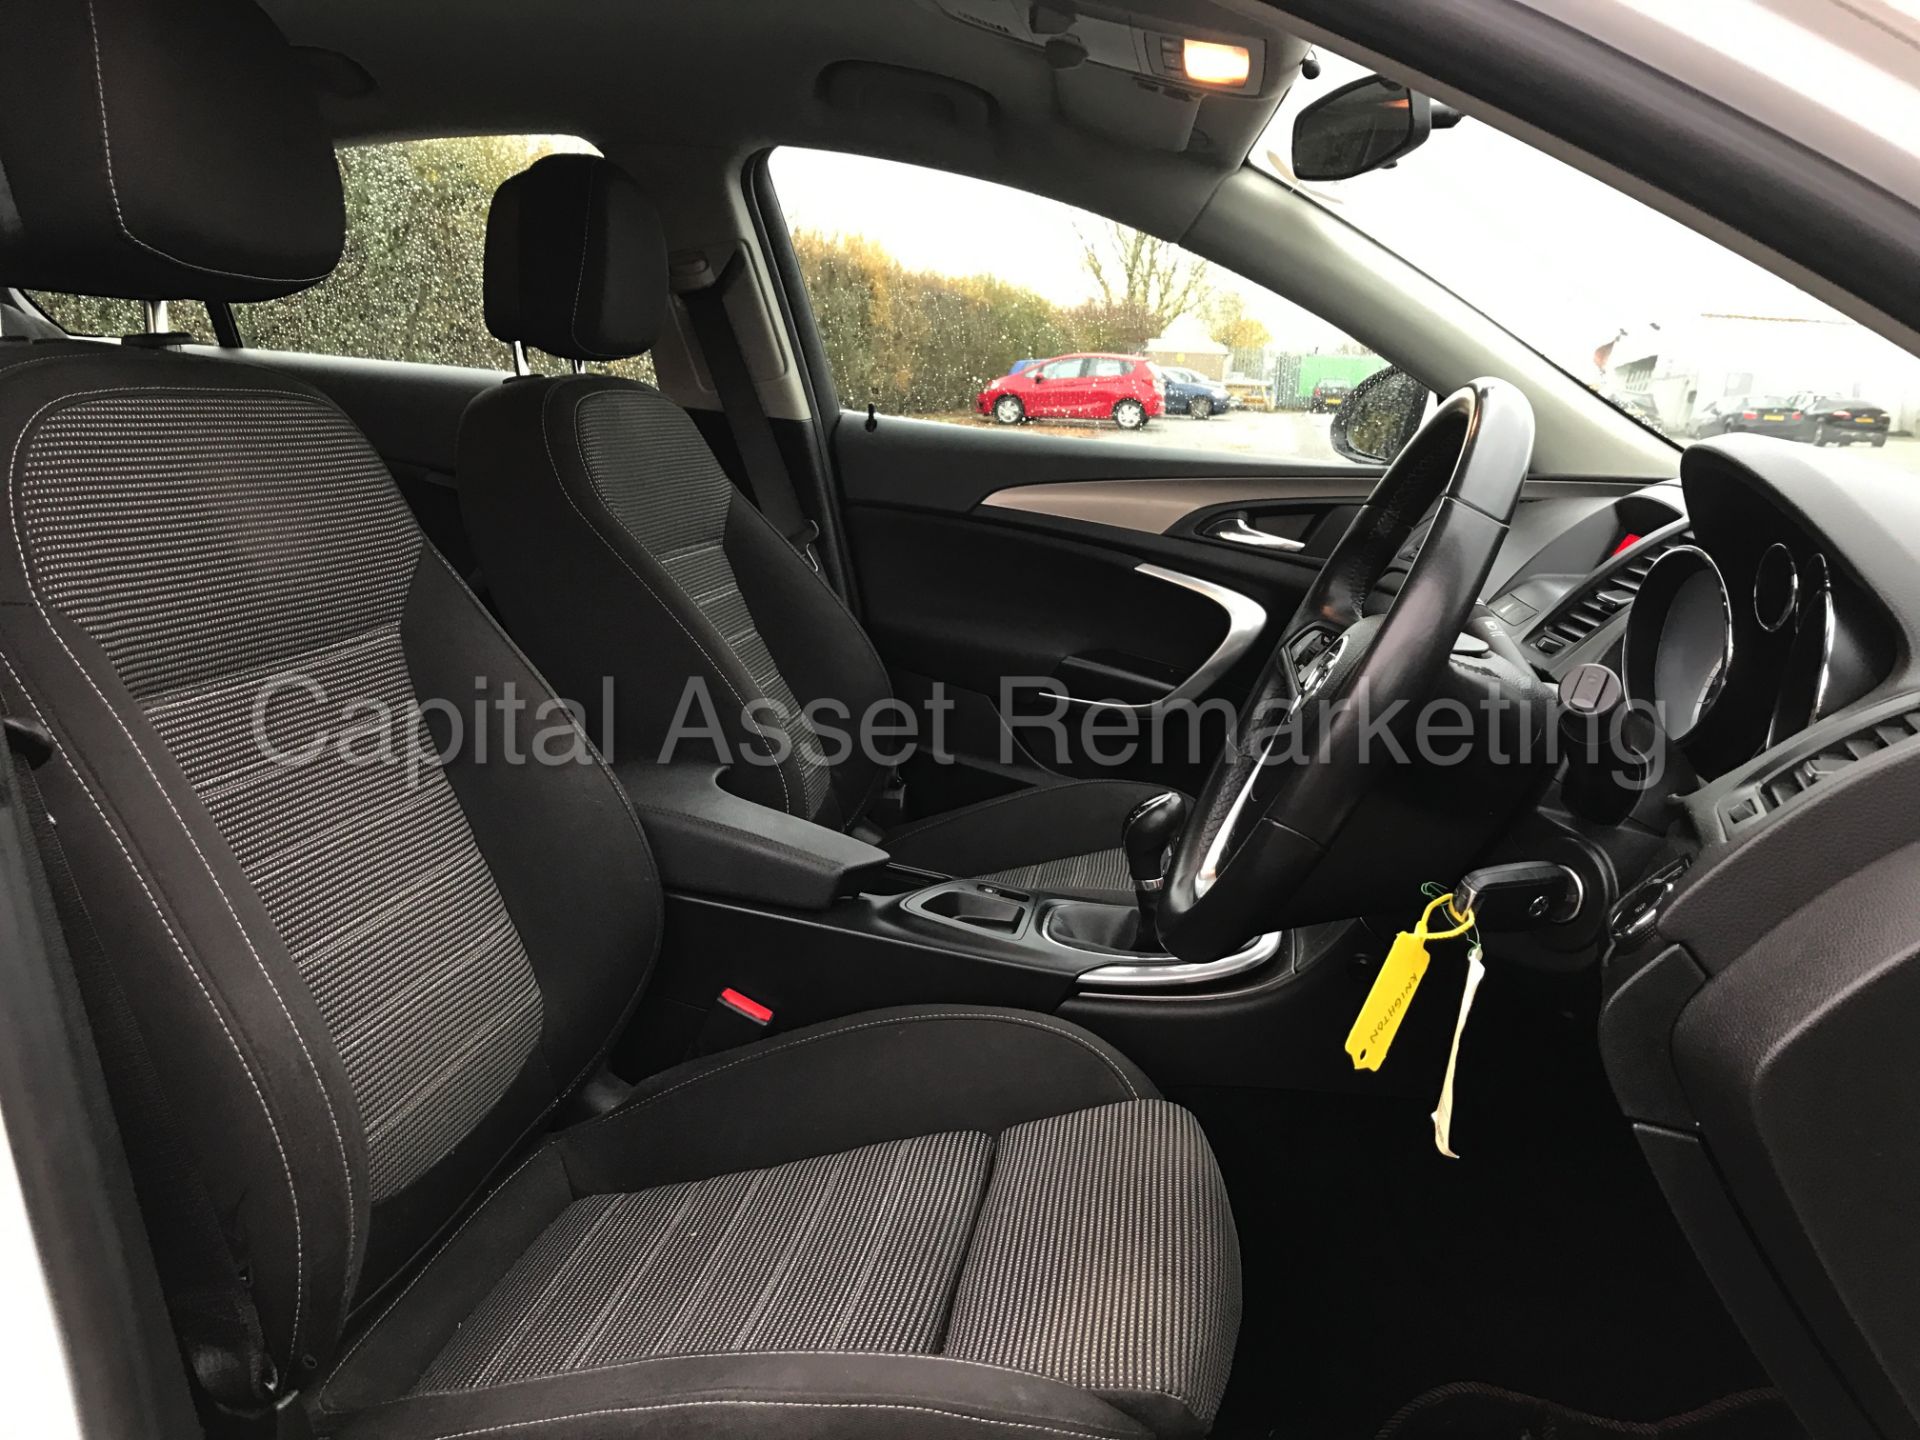 VAUXHALL INSIGNIA 'EXCLUSIVE' (2012) '2.0 CDTI - 6 SPEED - STOP/START - AIR CON' *1 FORMER KEEPER* - Image 21 of 26